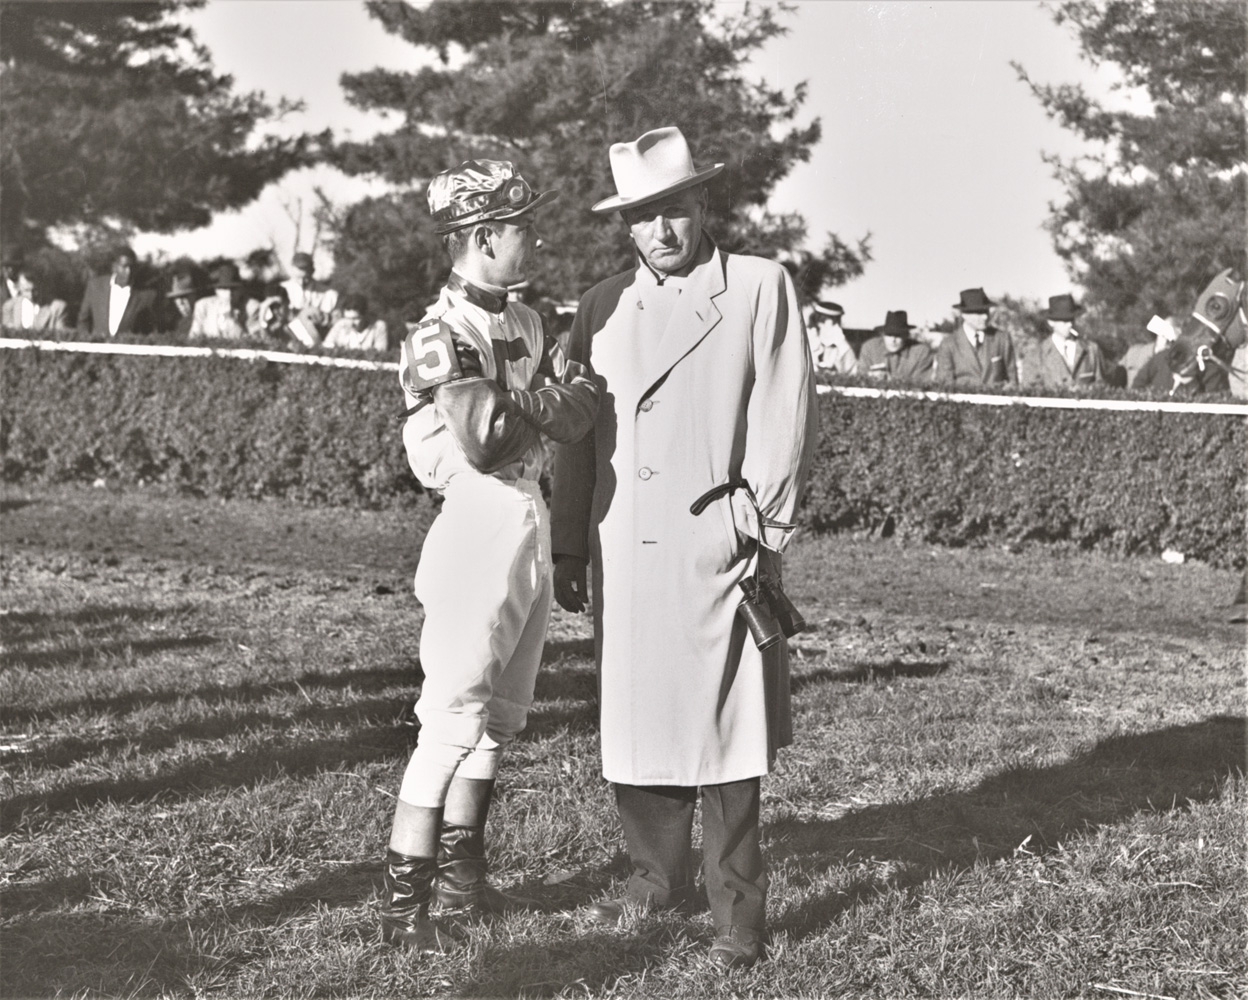 L. Risley and Henry Forrest in the paddock at Keeneland, April 1954 (Keeneland Association)